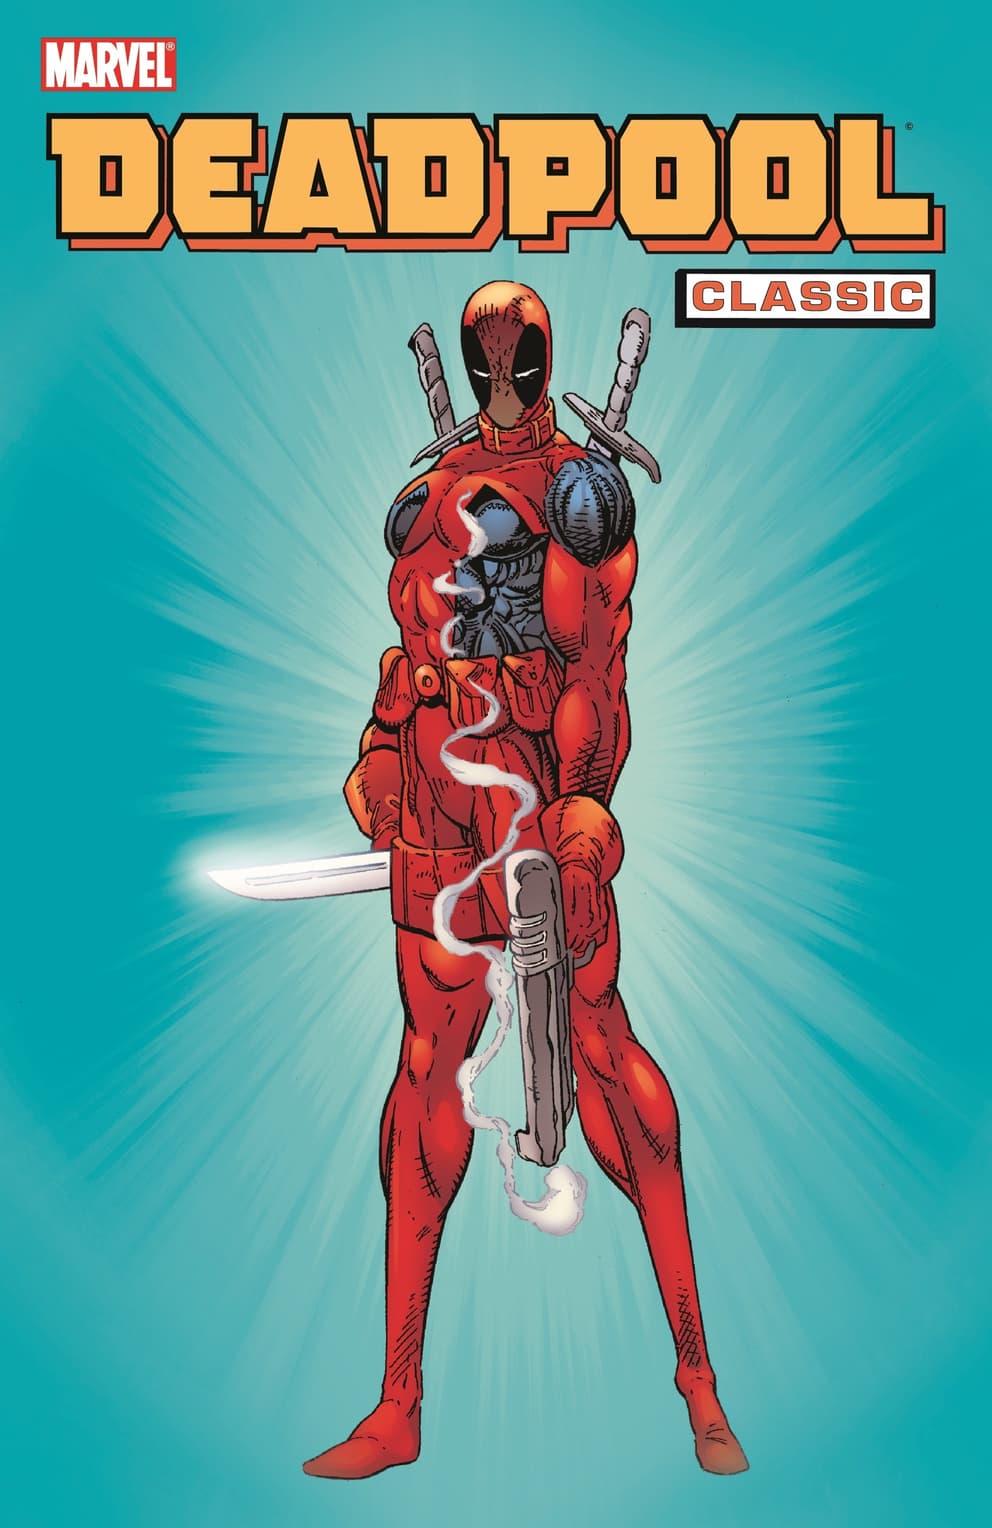 Cover to DEADPOOL CLASSIC VOL. 1.